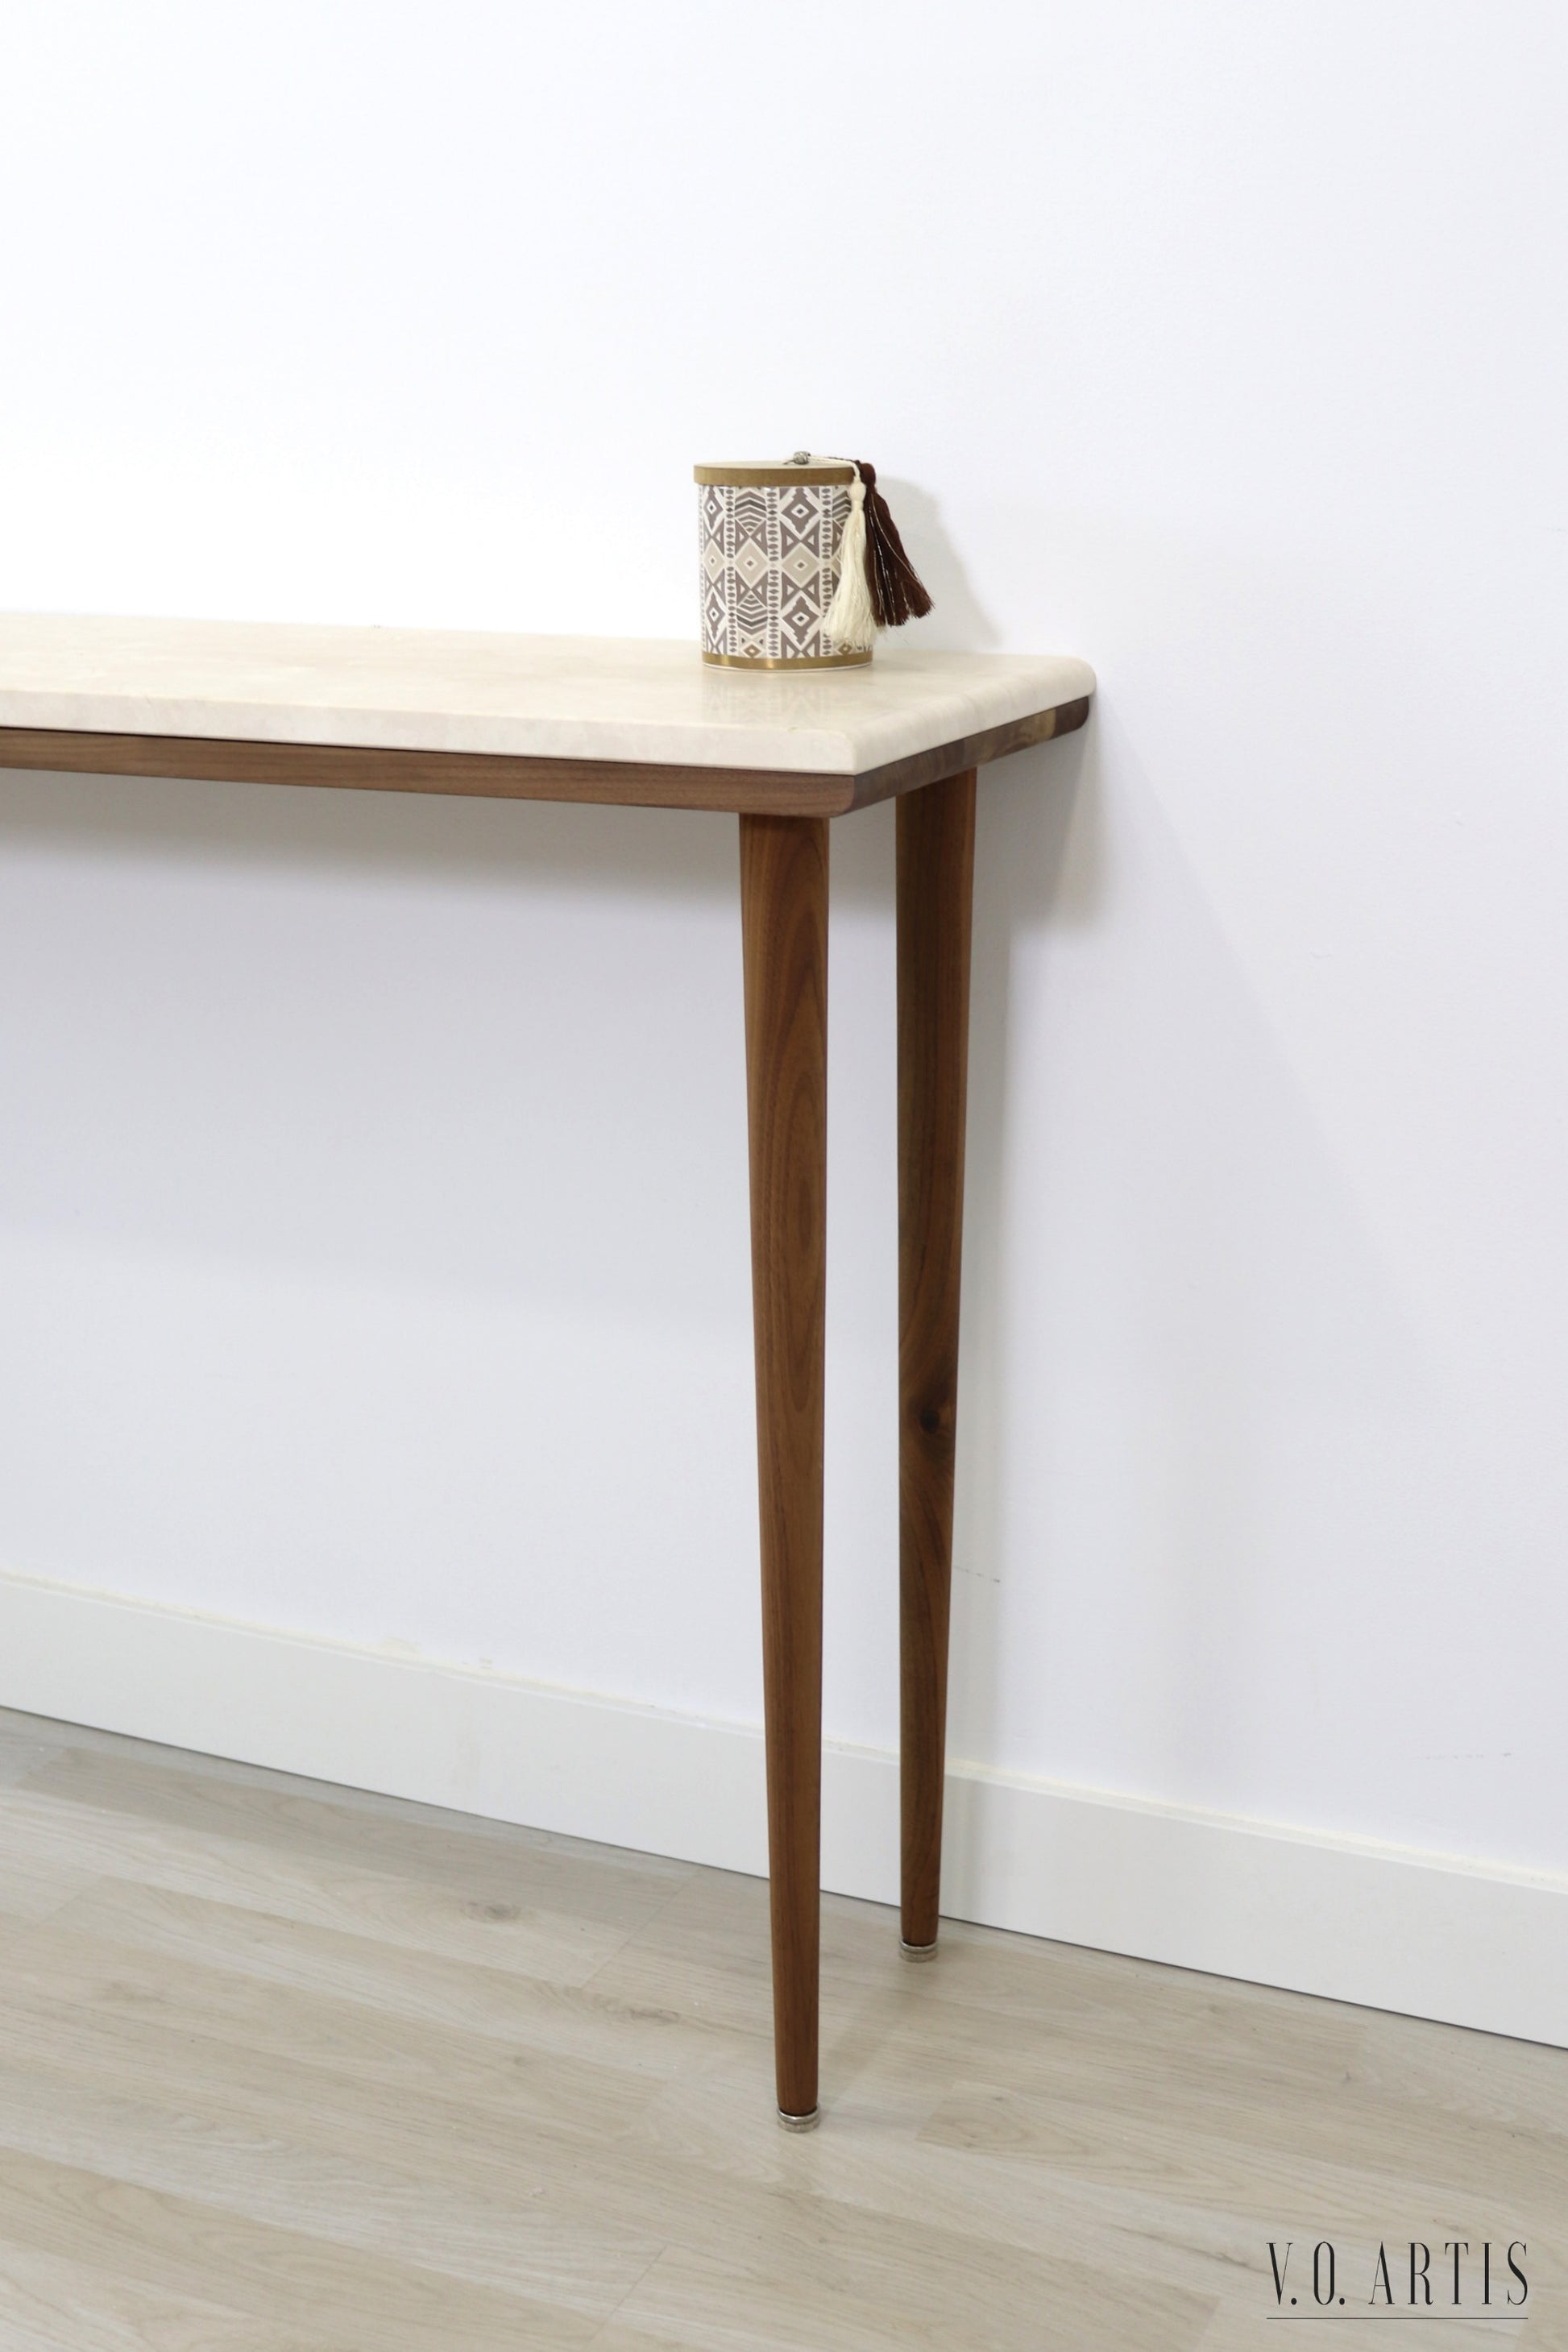 Narrow console table with 4 Legs in solid American Walnut and